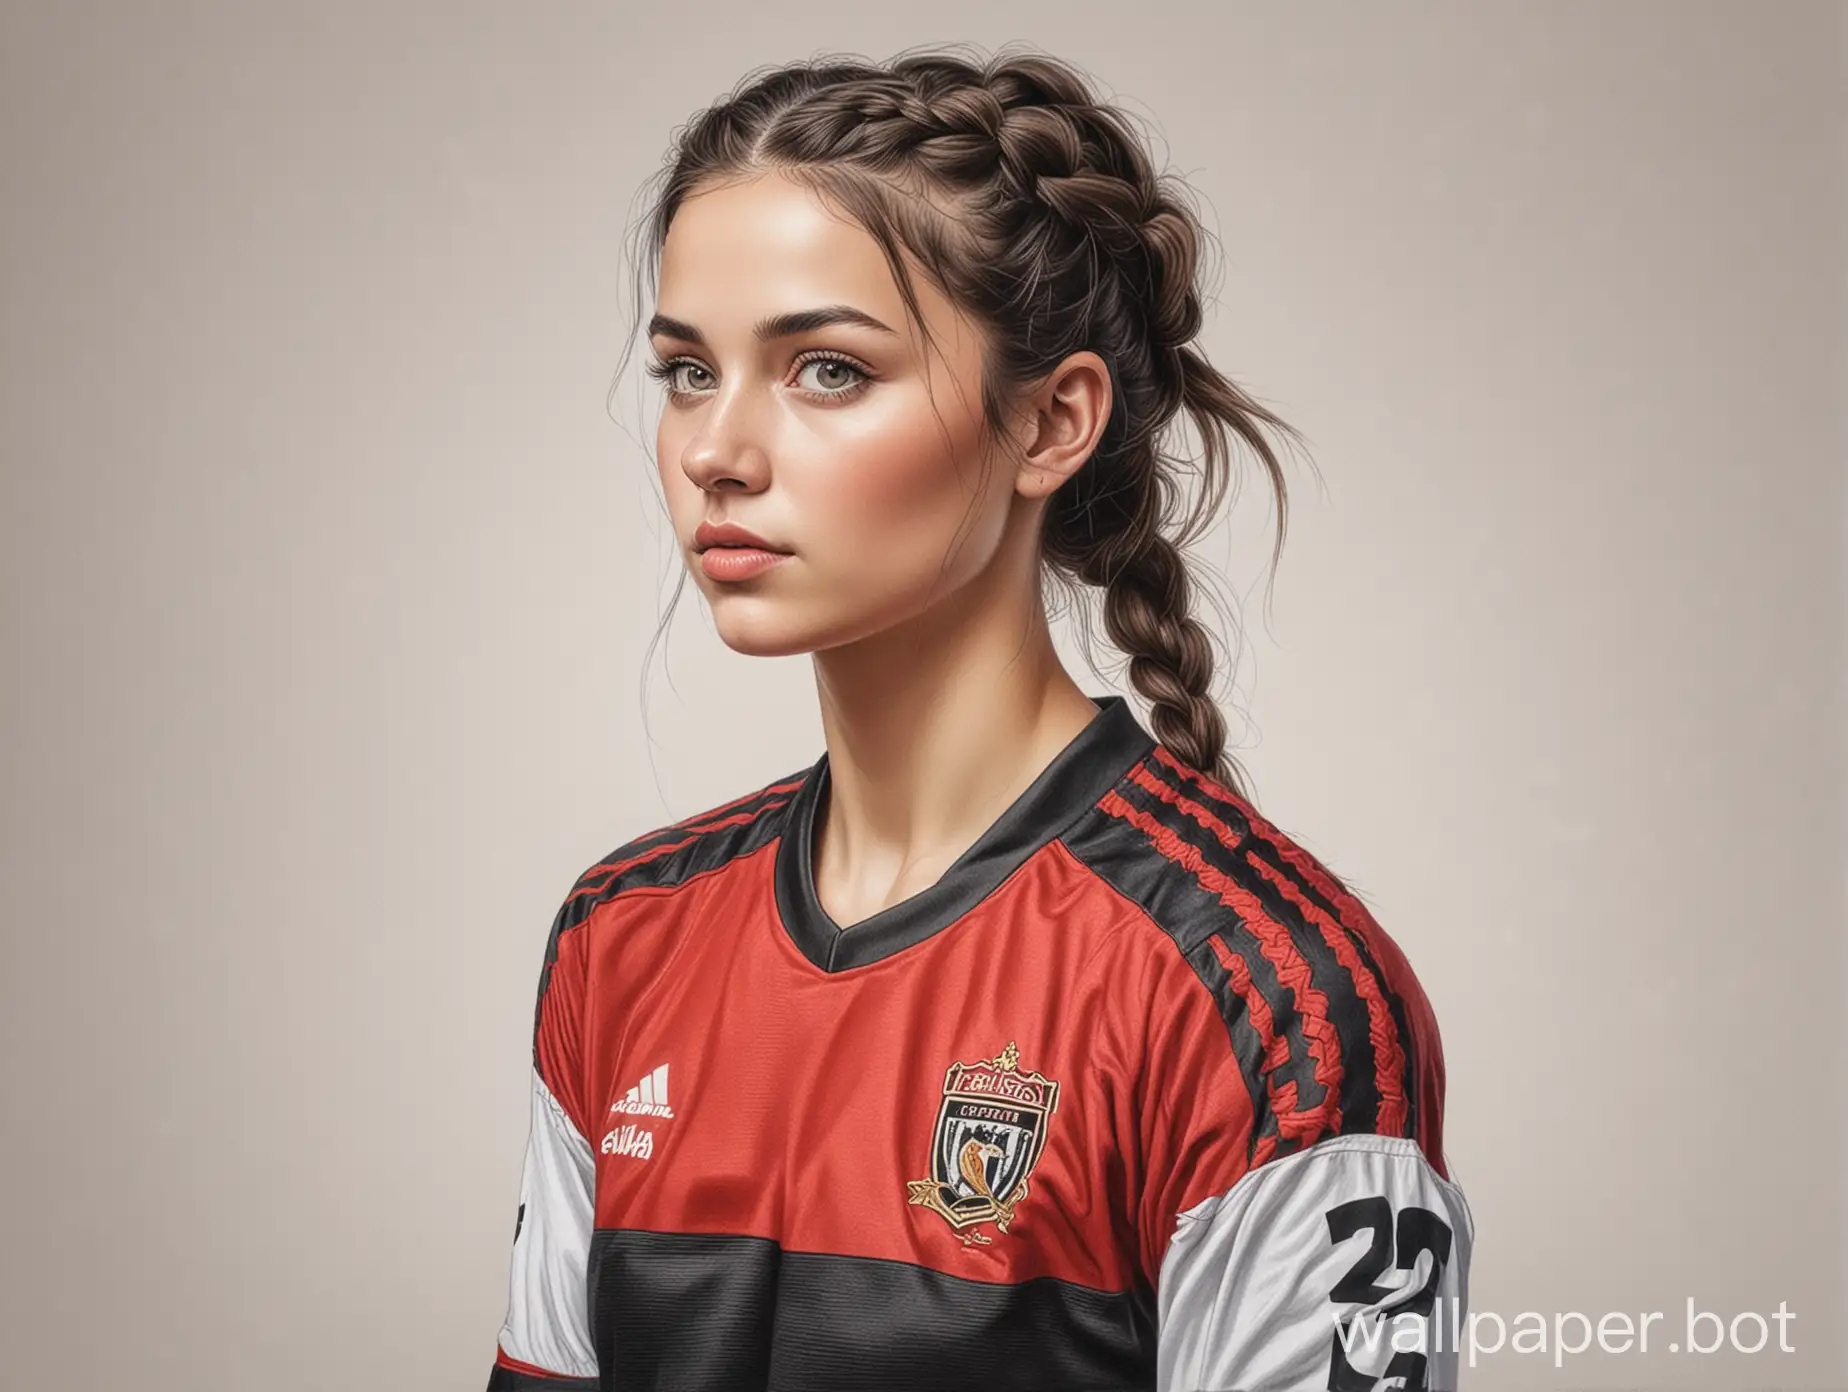 Anna Komarova sketch 20 years, dark hair braided hairstyle, cup size 4, narrow waist, in red-black soccer uniform on white background, very realistic drawing with colored pencils Sport style poster